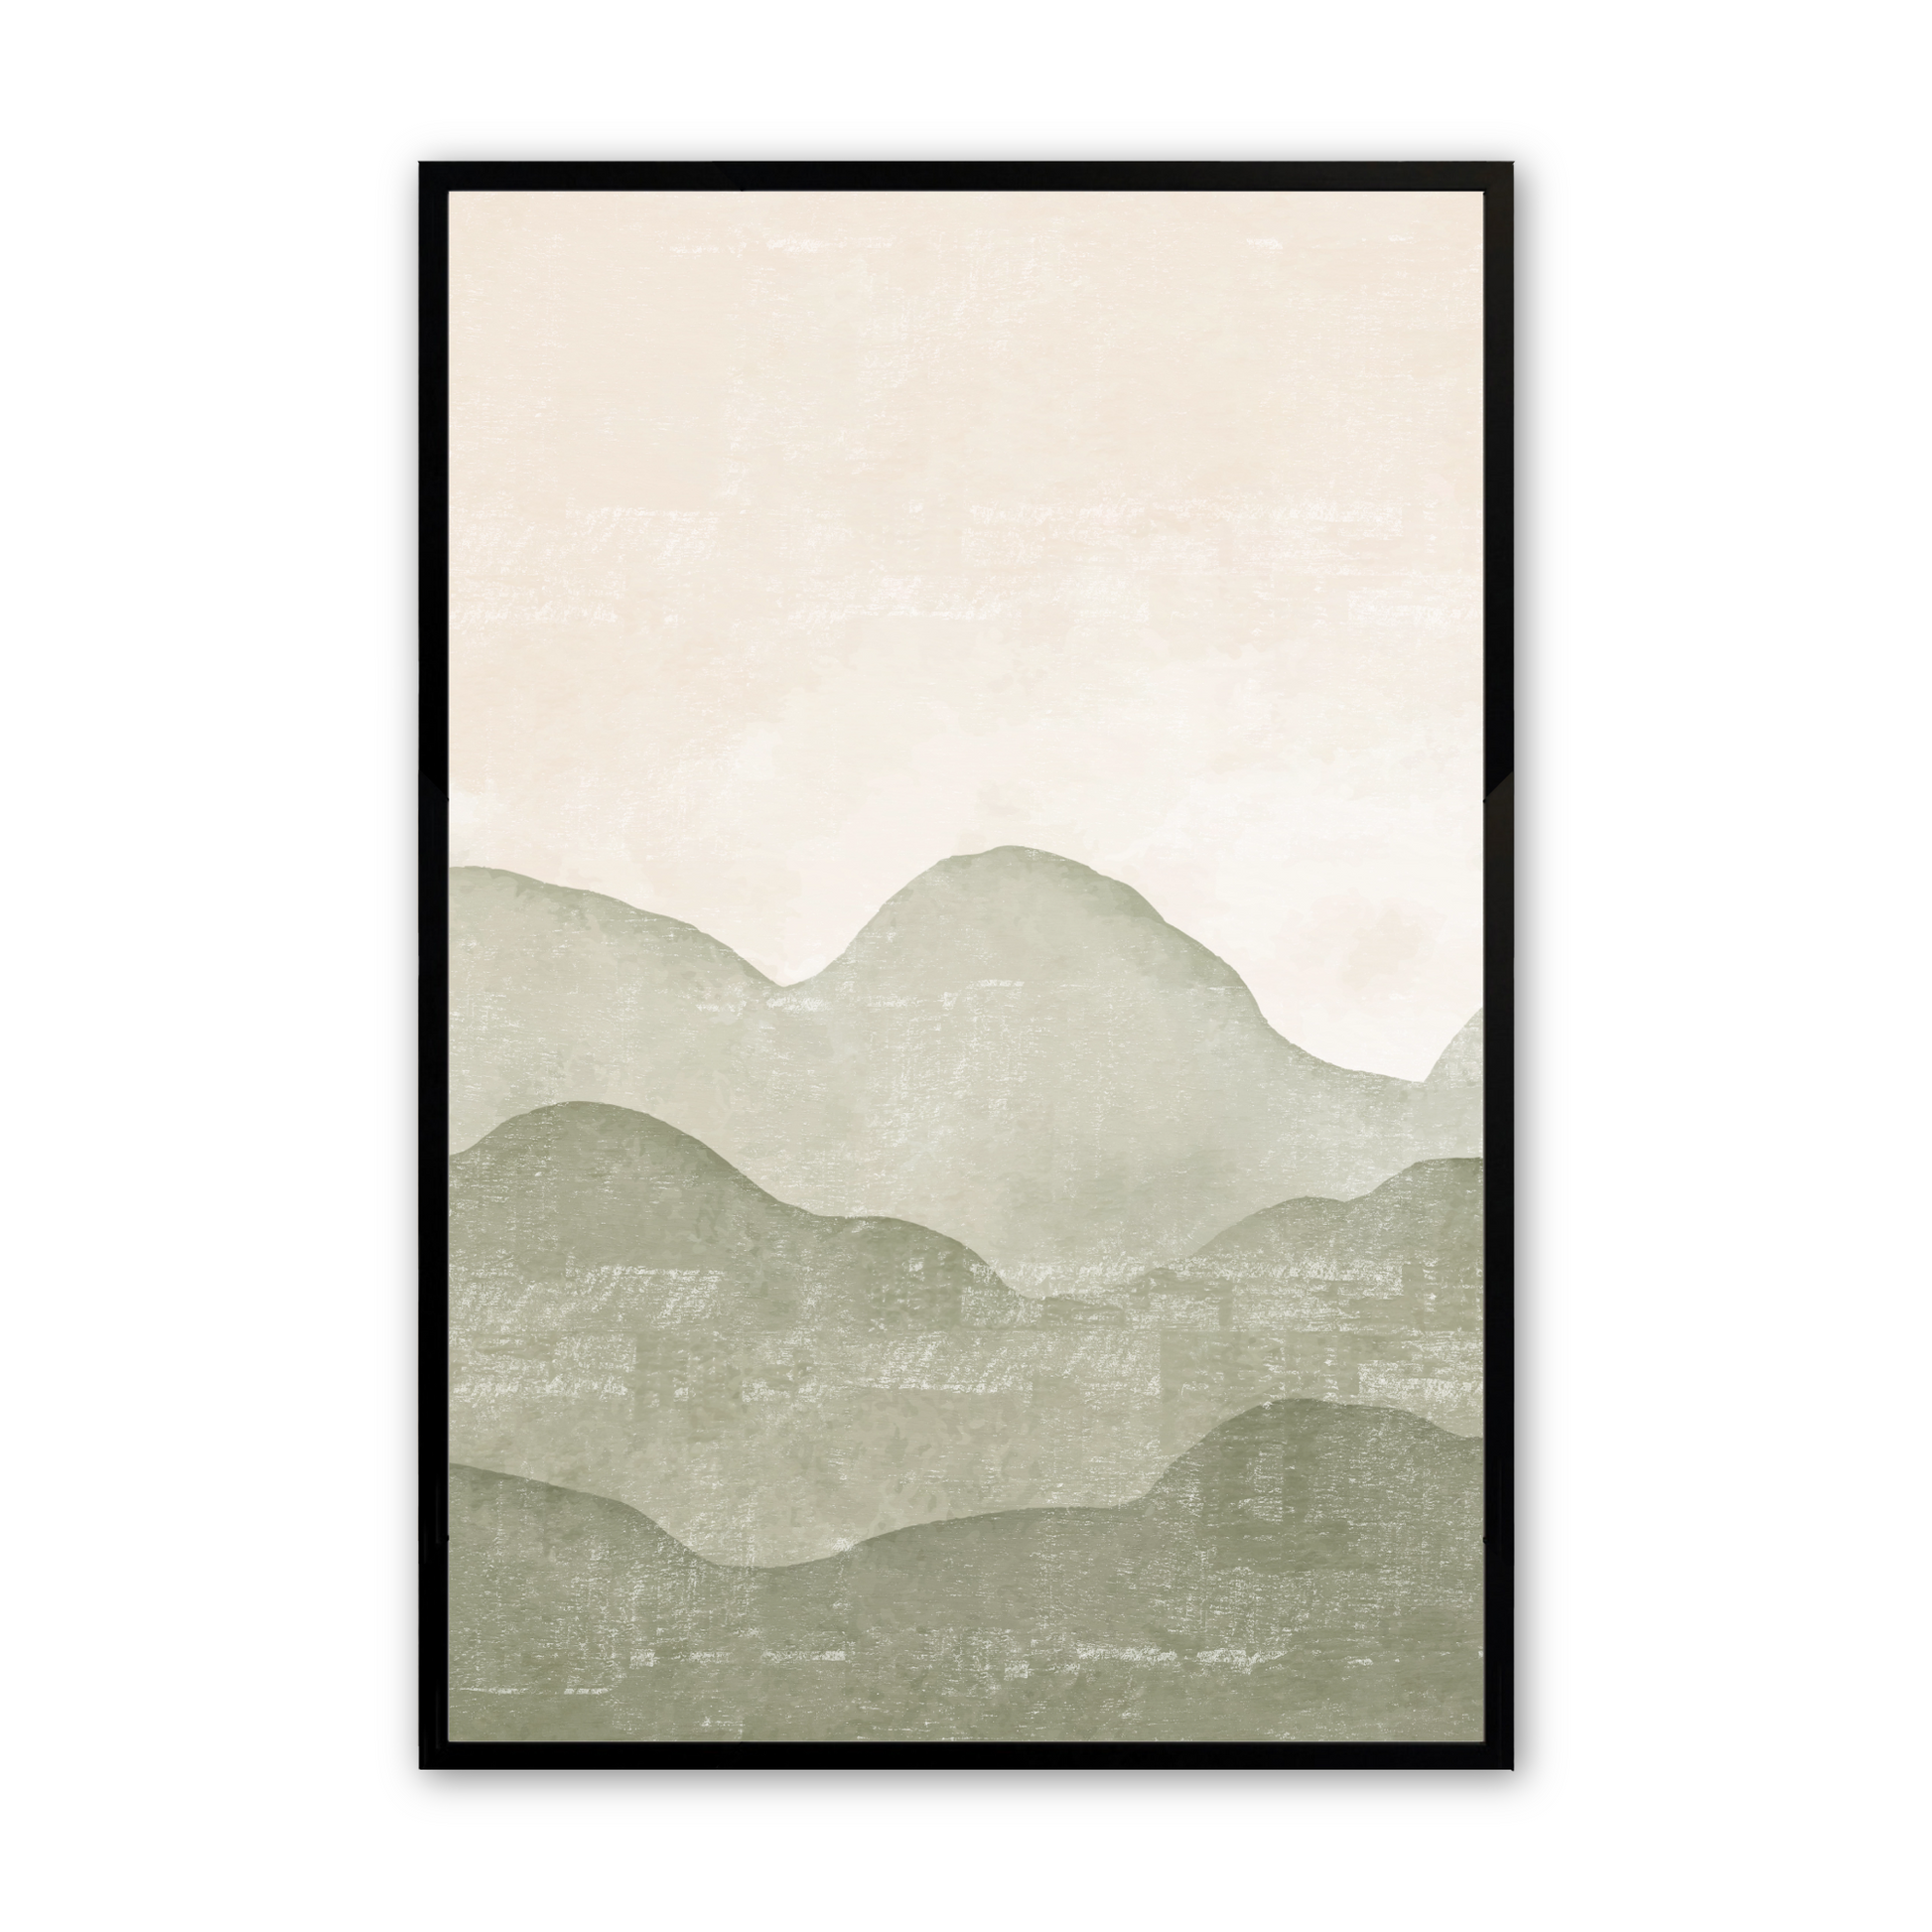 [color:Satin Black], Picture of the second of 3 mountain illustrations in a black frame